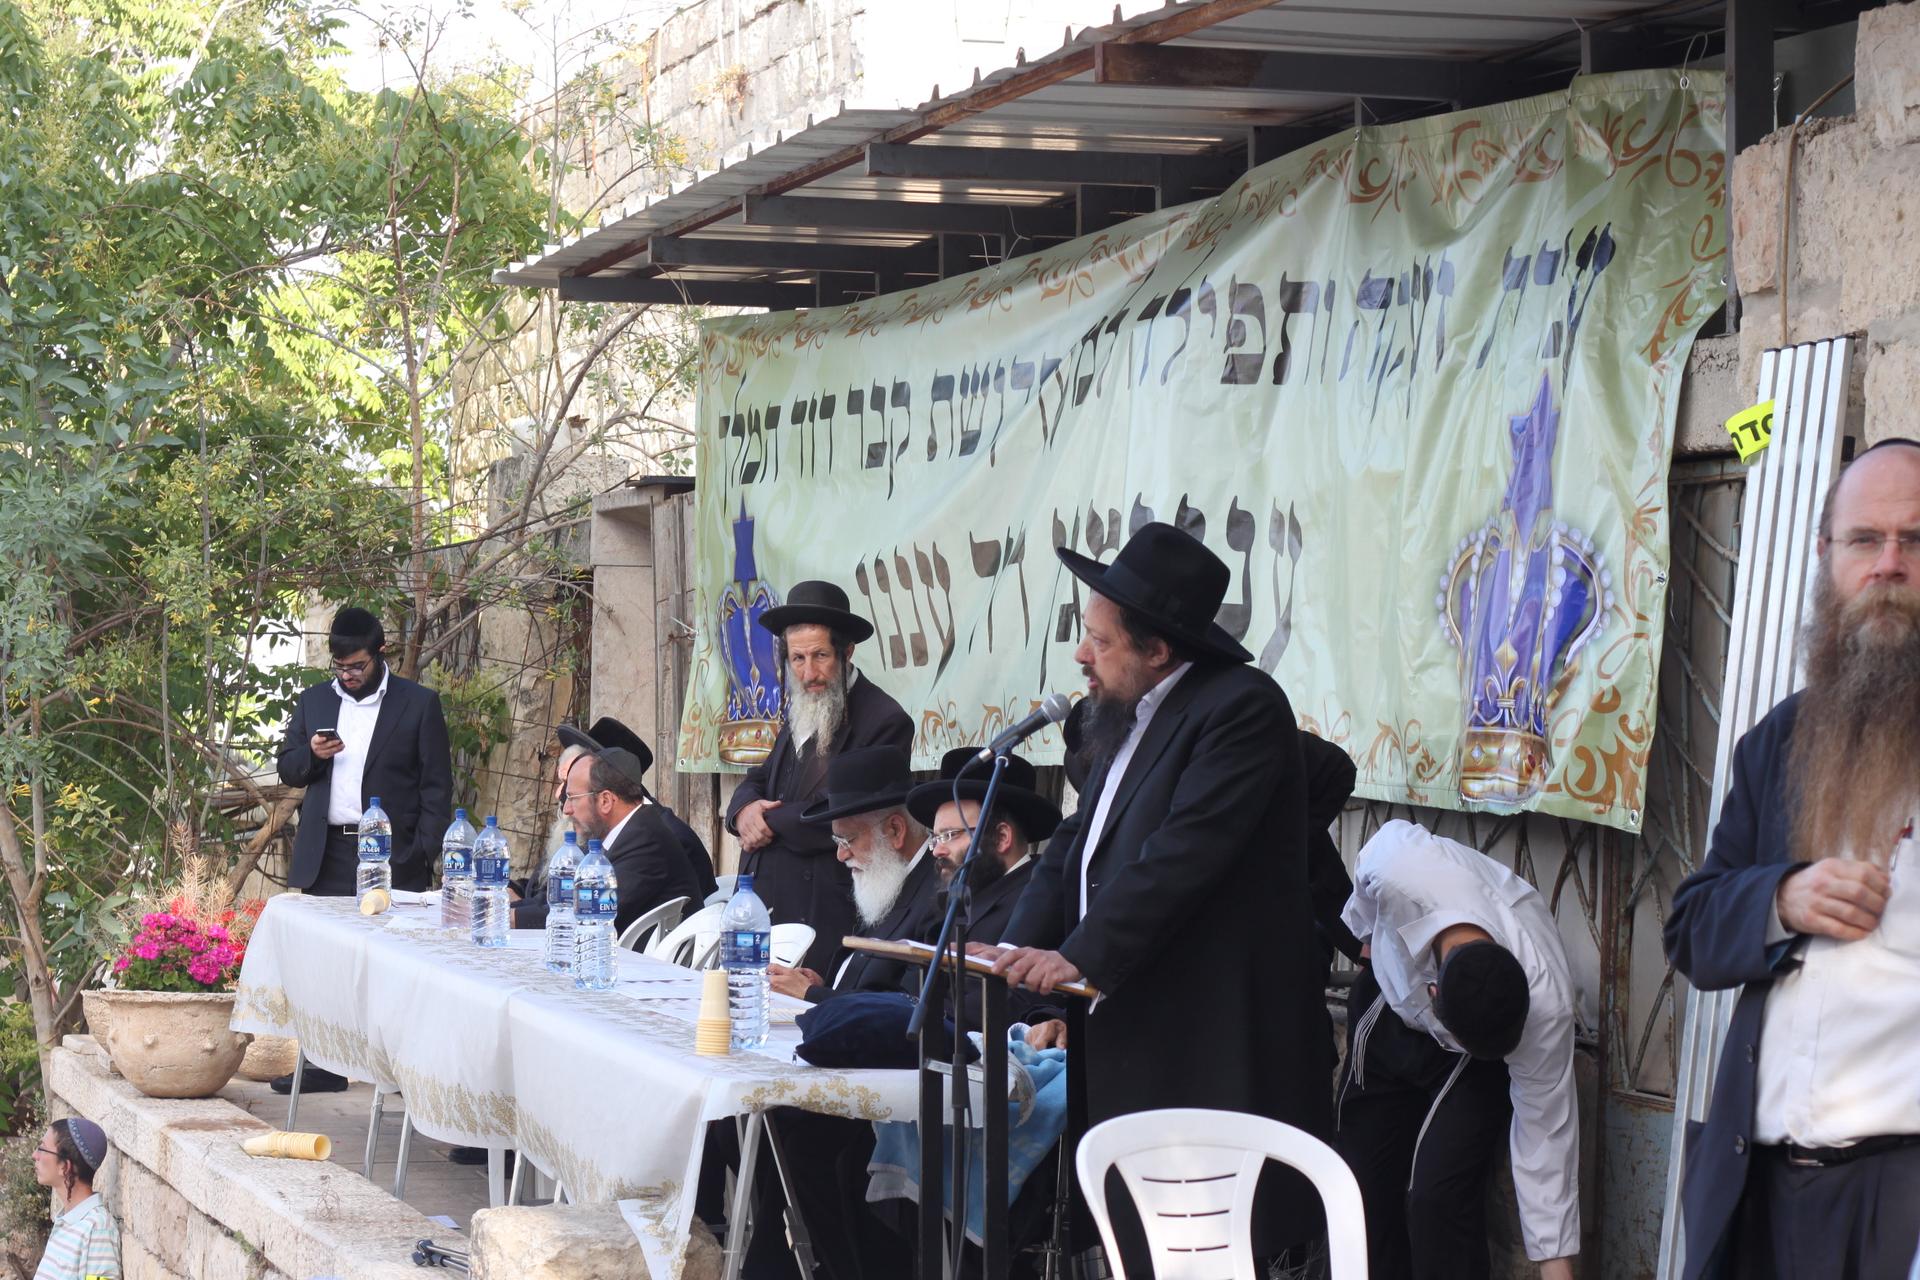 Orthodox nationalist rabbis lead a protest against rumors that Israel will transfer the site of King David's tomb and Jesus' Last Supper to the Vatican.